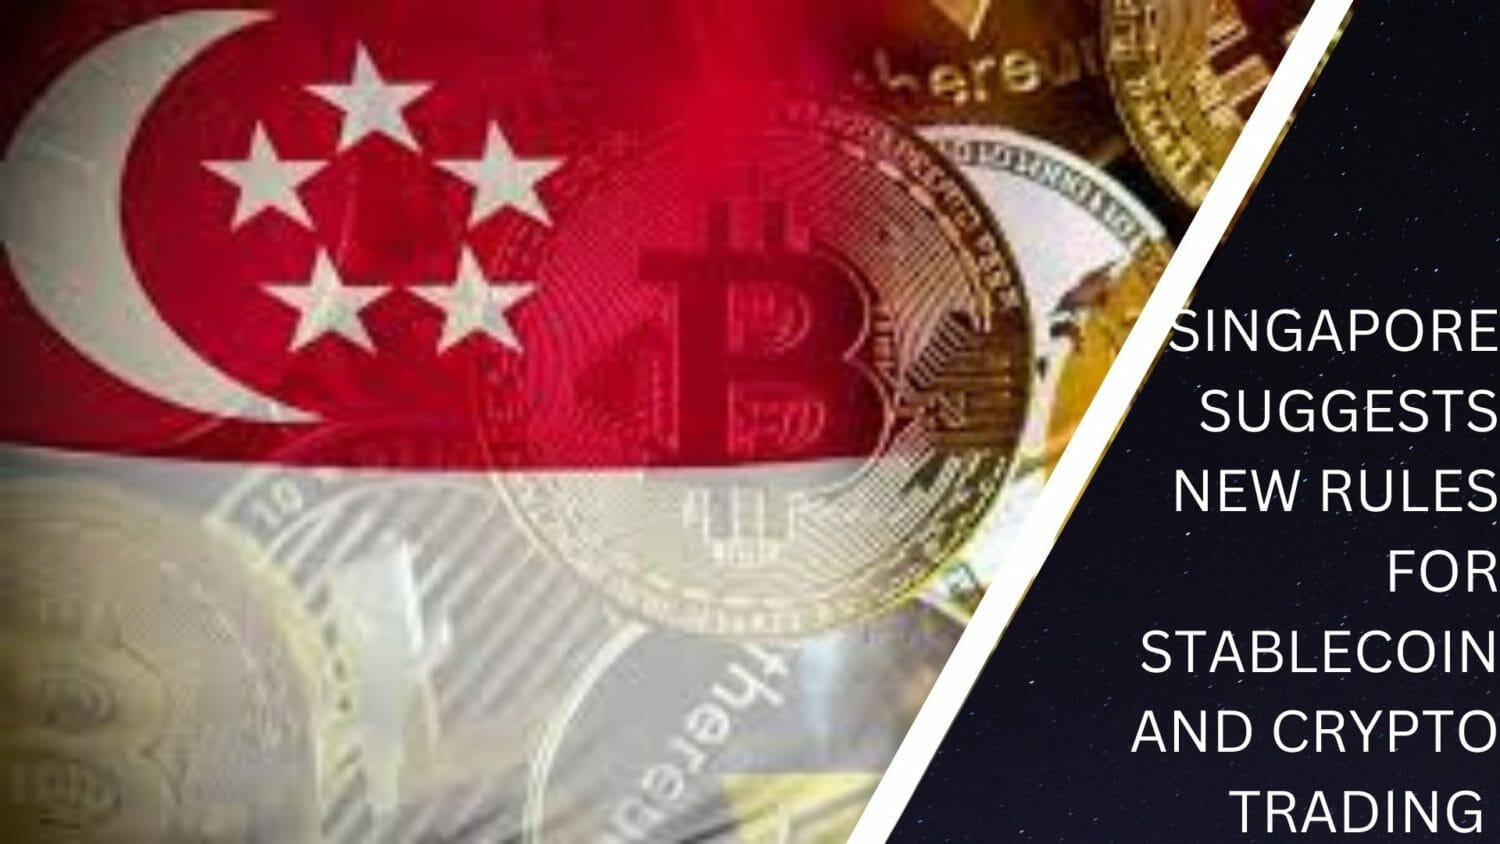 Singapore Suggests New Rules For Stablecoin And Crypto Trading 